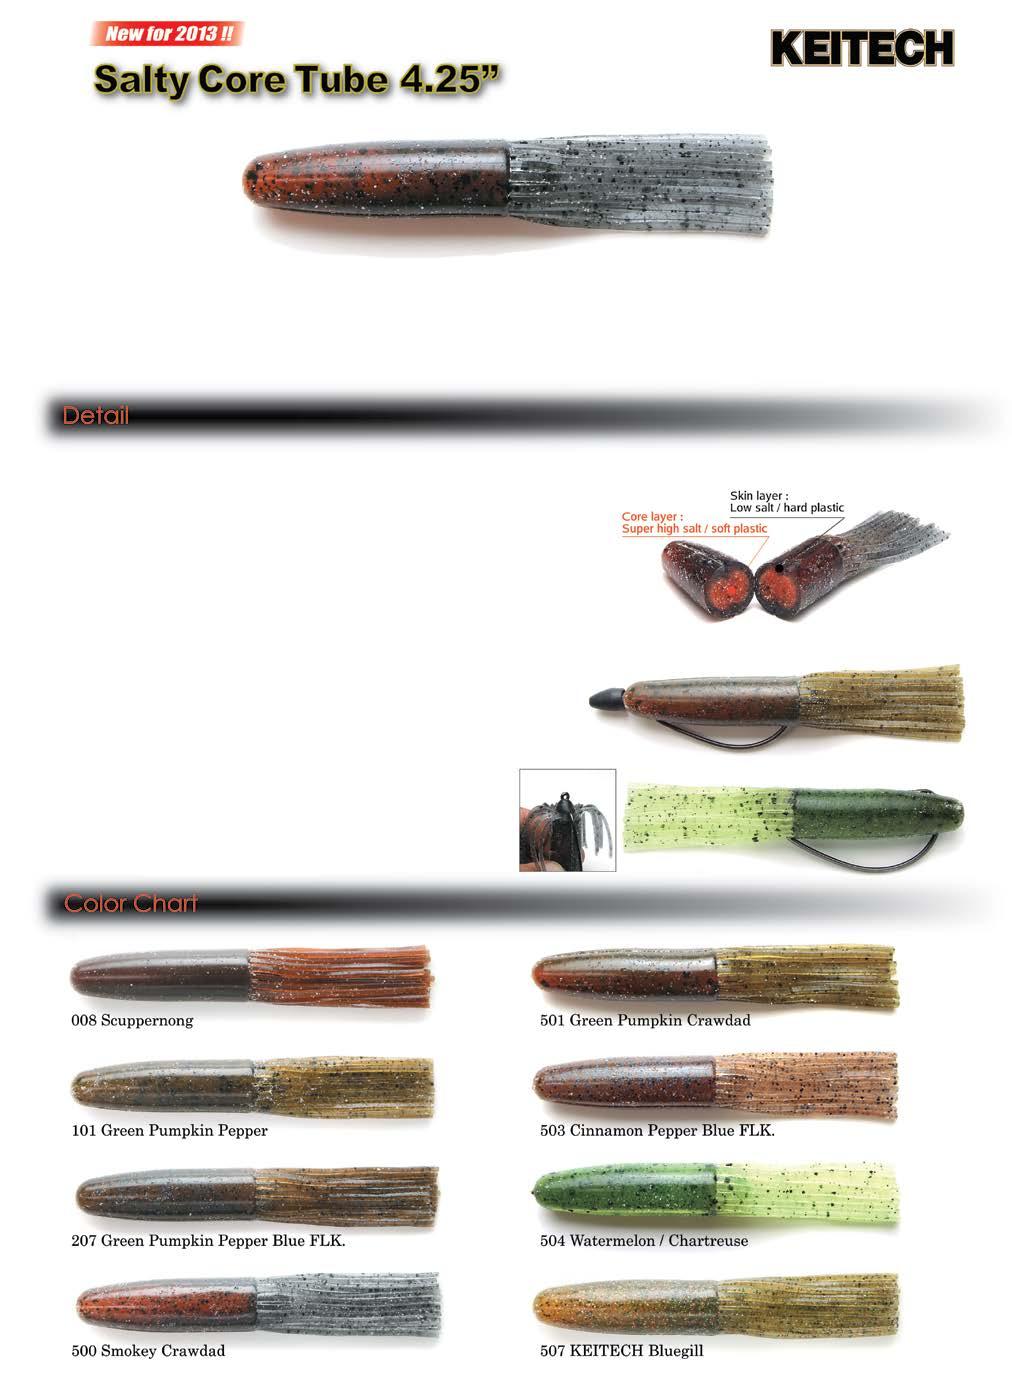 Salty Core Tube Keitech has developed a new technology that allows us to create a brand new bait called the Salty Core Tube.